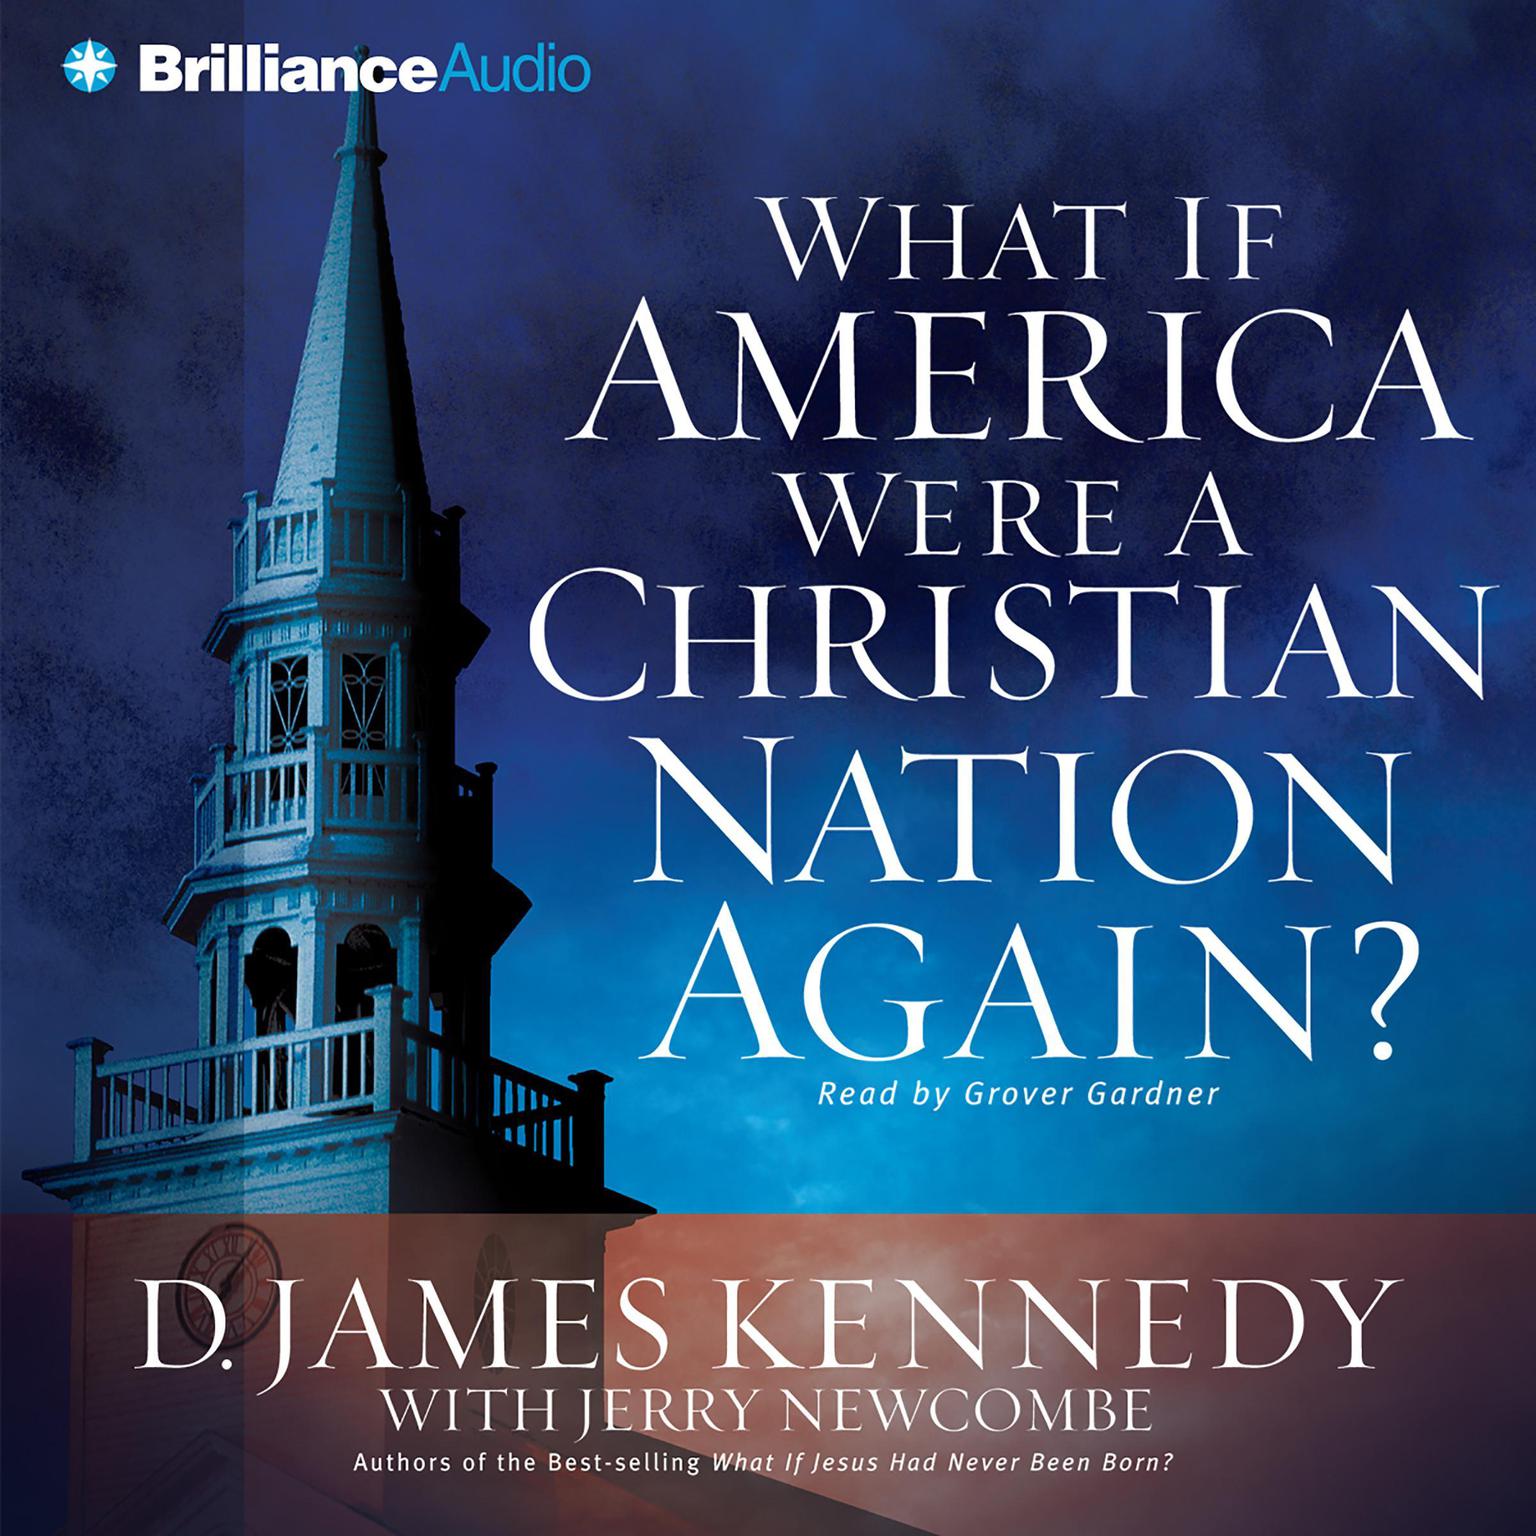 What if America Were a Christian Nation Again? (Abridged) Audiobook, by D. James Kennedy